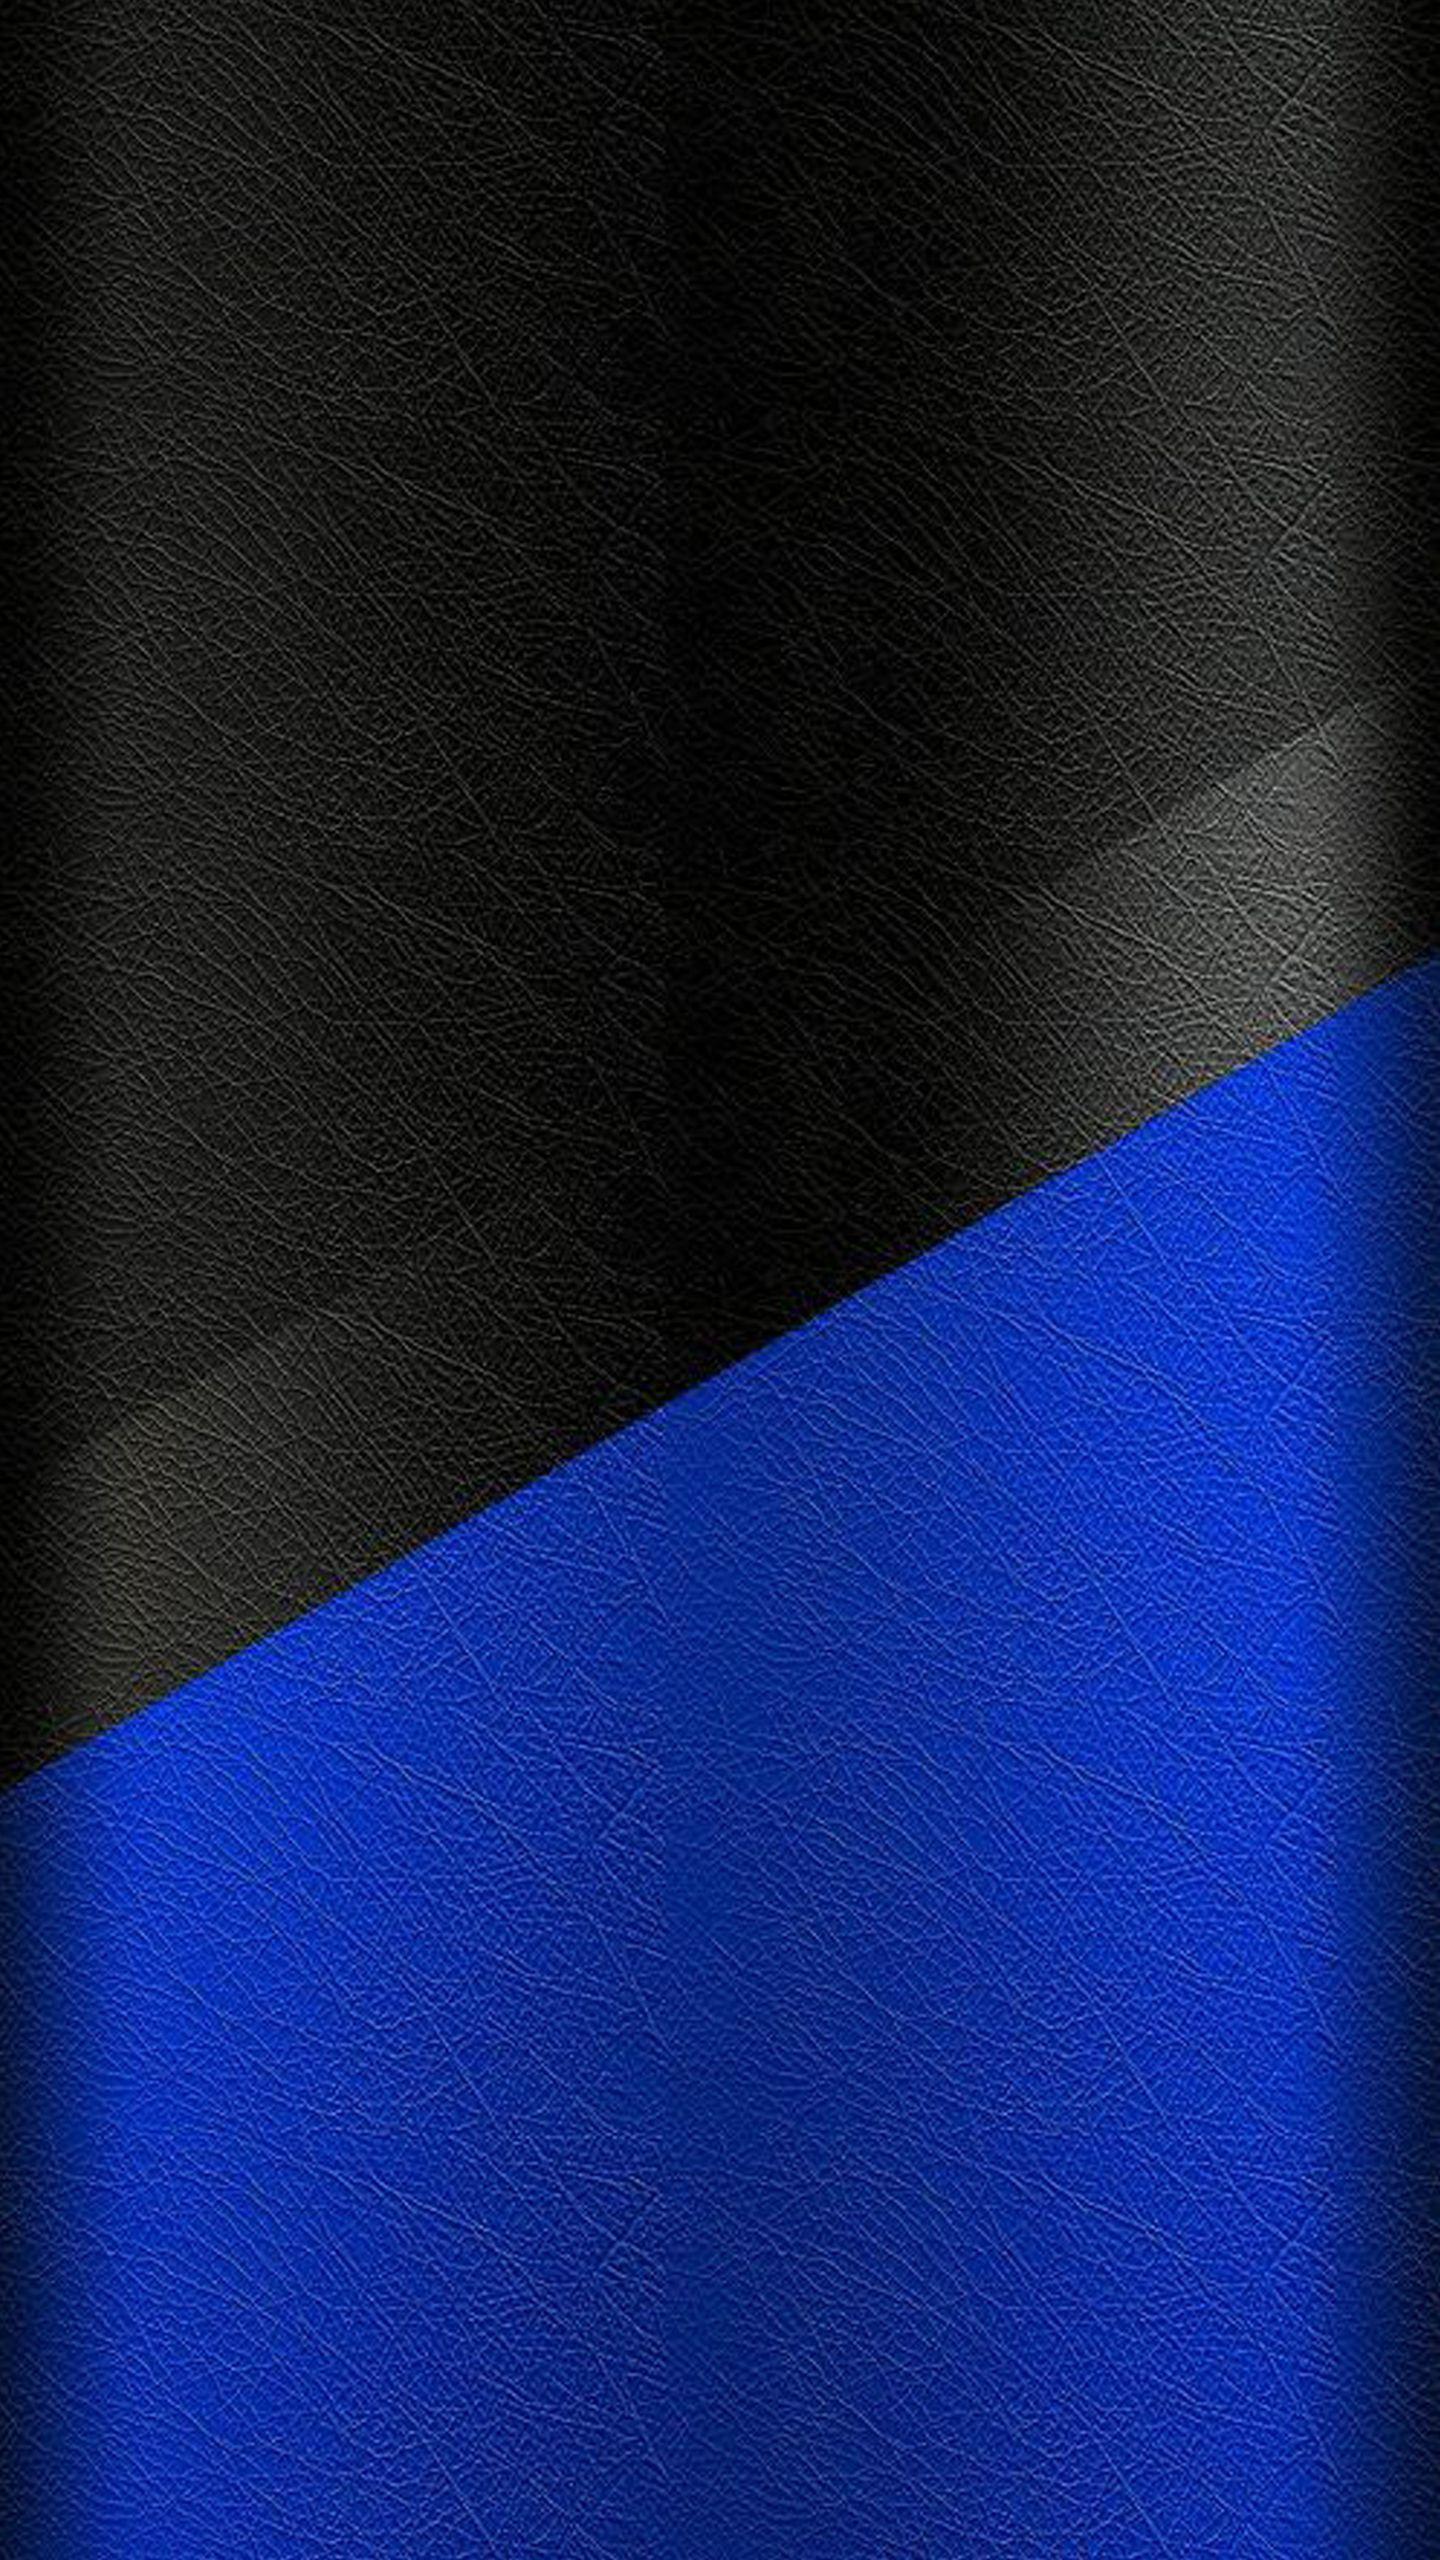 Dark S7 Edge Wallpaper 02 and Blue Leather Pattern. Special